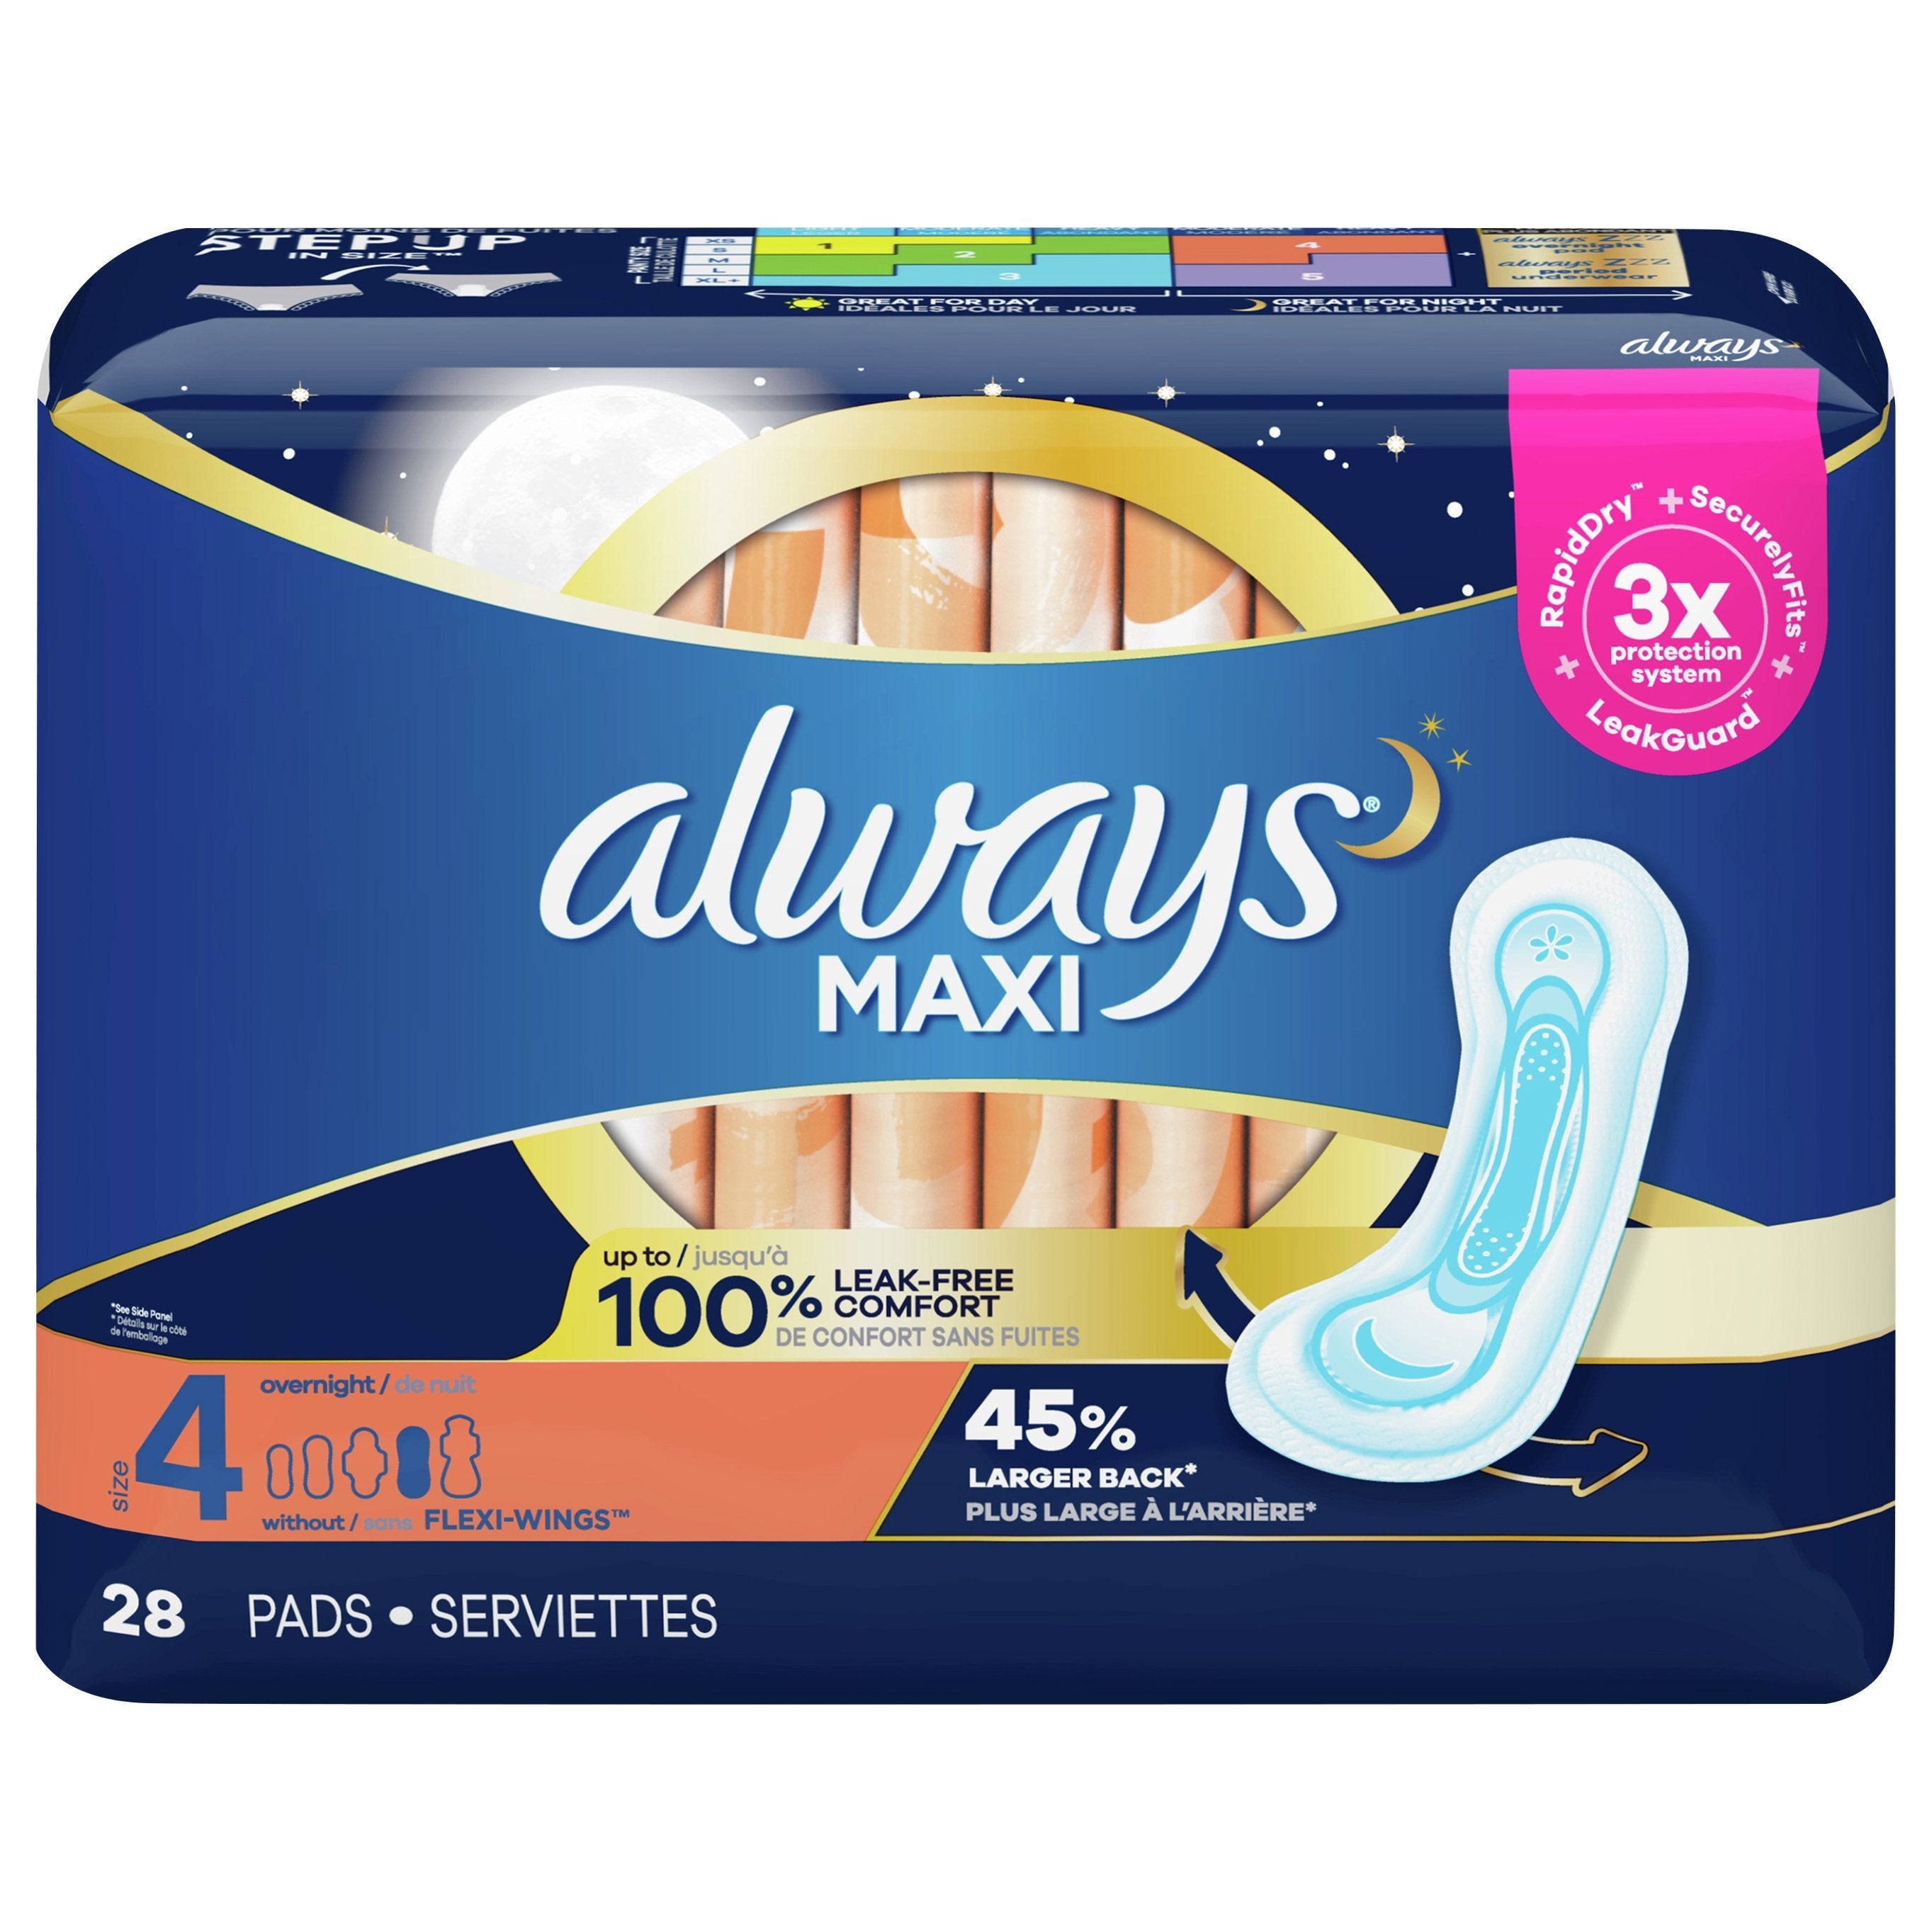 Kotex Security Maxi Overnight Pads Double Pack, 28 units – U by